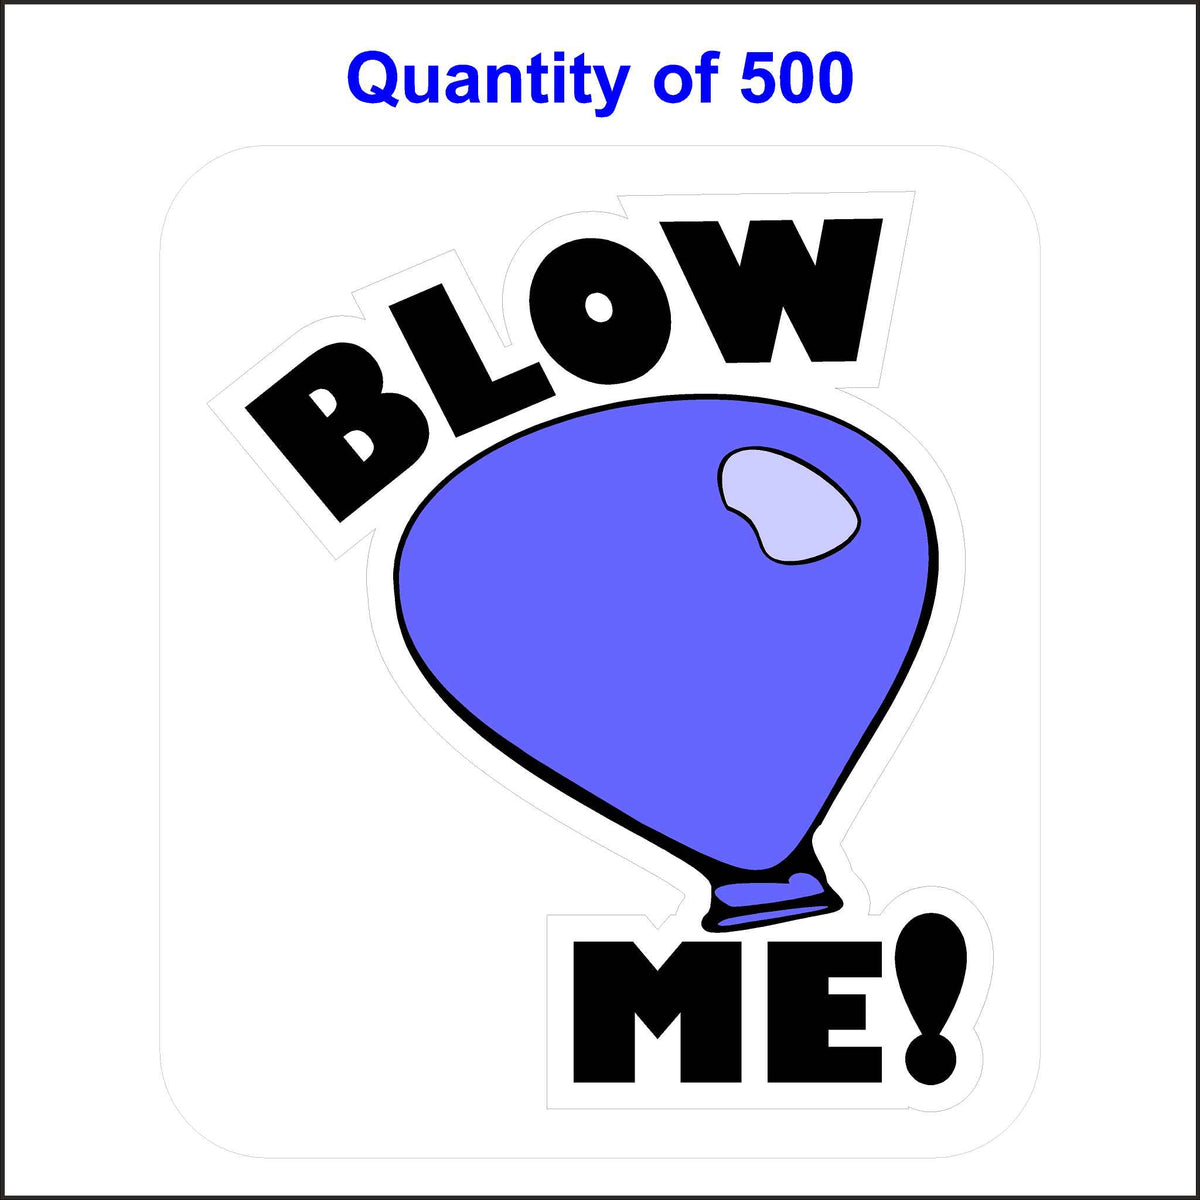 500 Blow Me Hard Hat Stickers. Printed in Black Are the Words Blow Me! They Wrap Around a Purple Balloon.